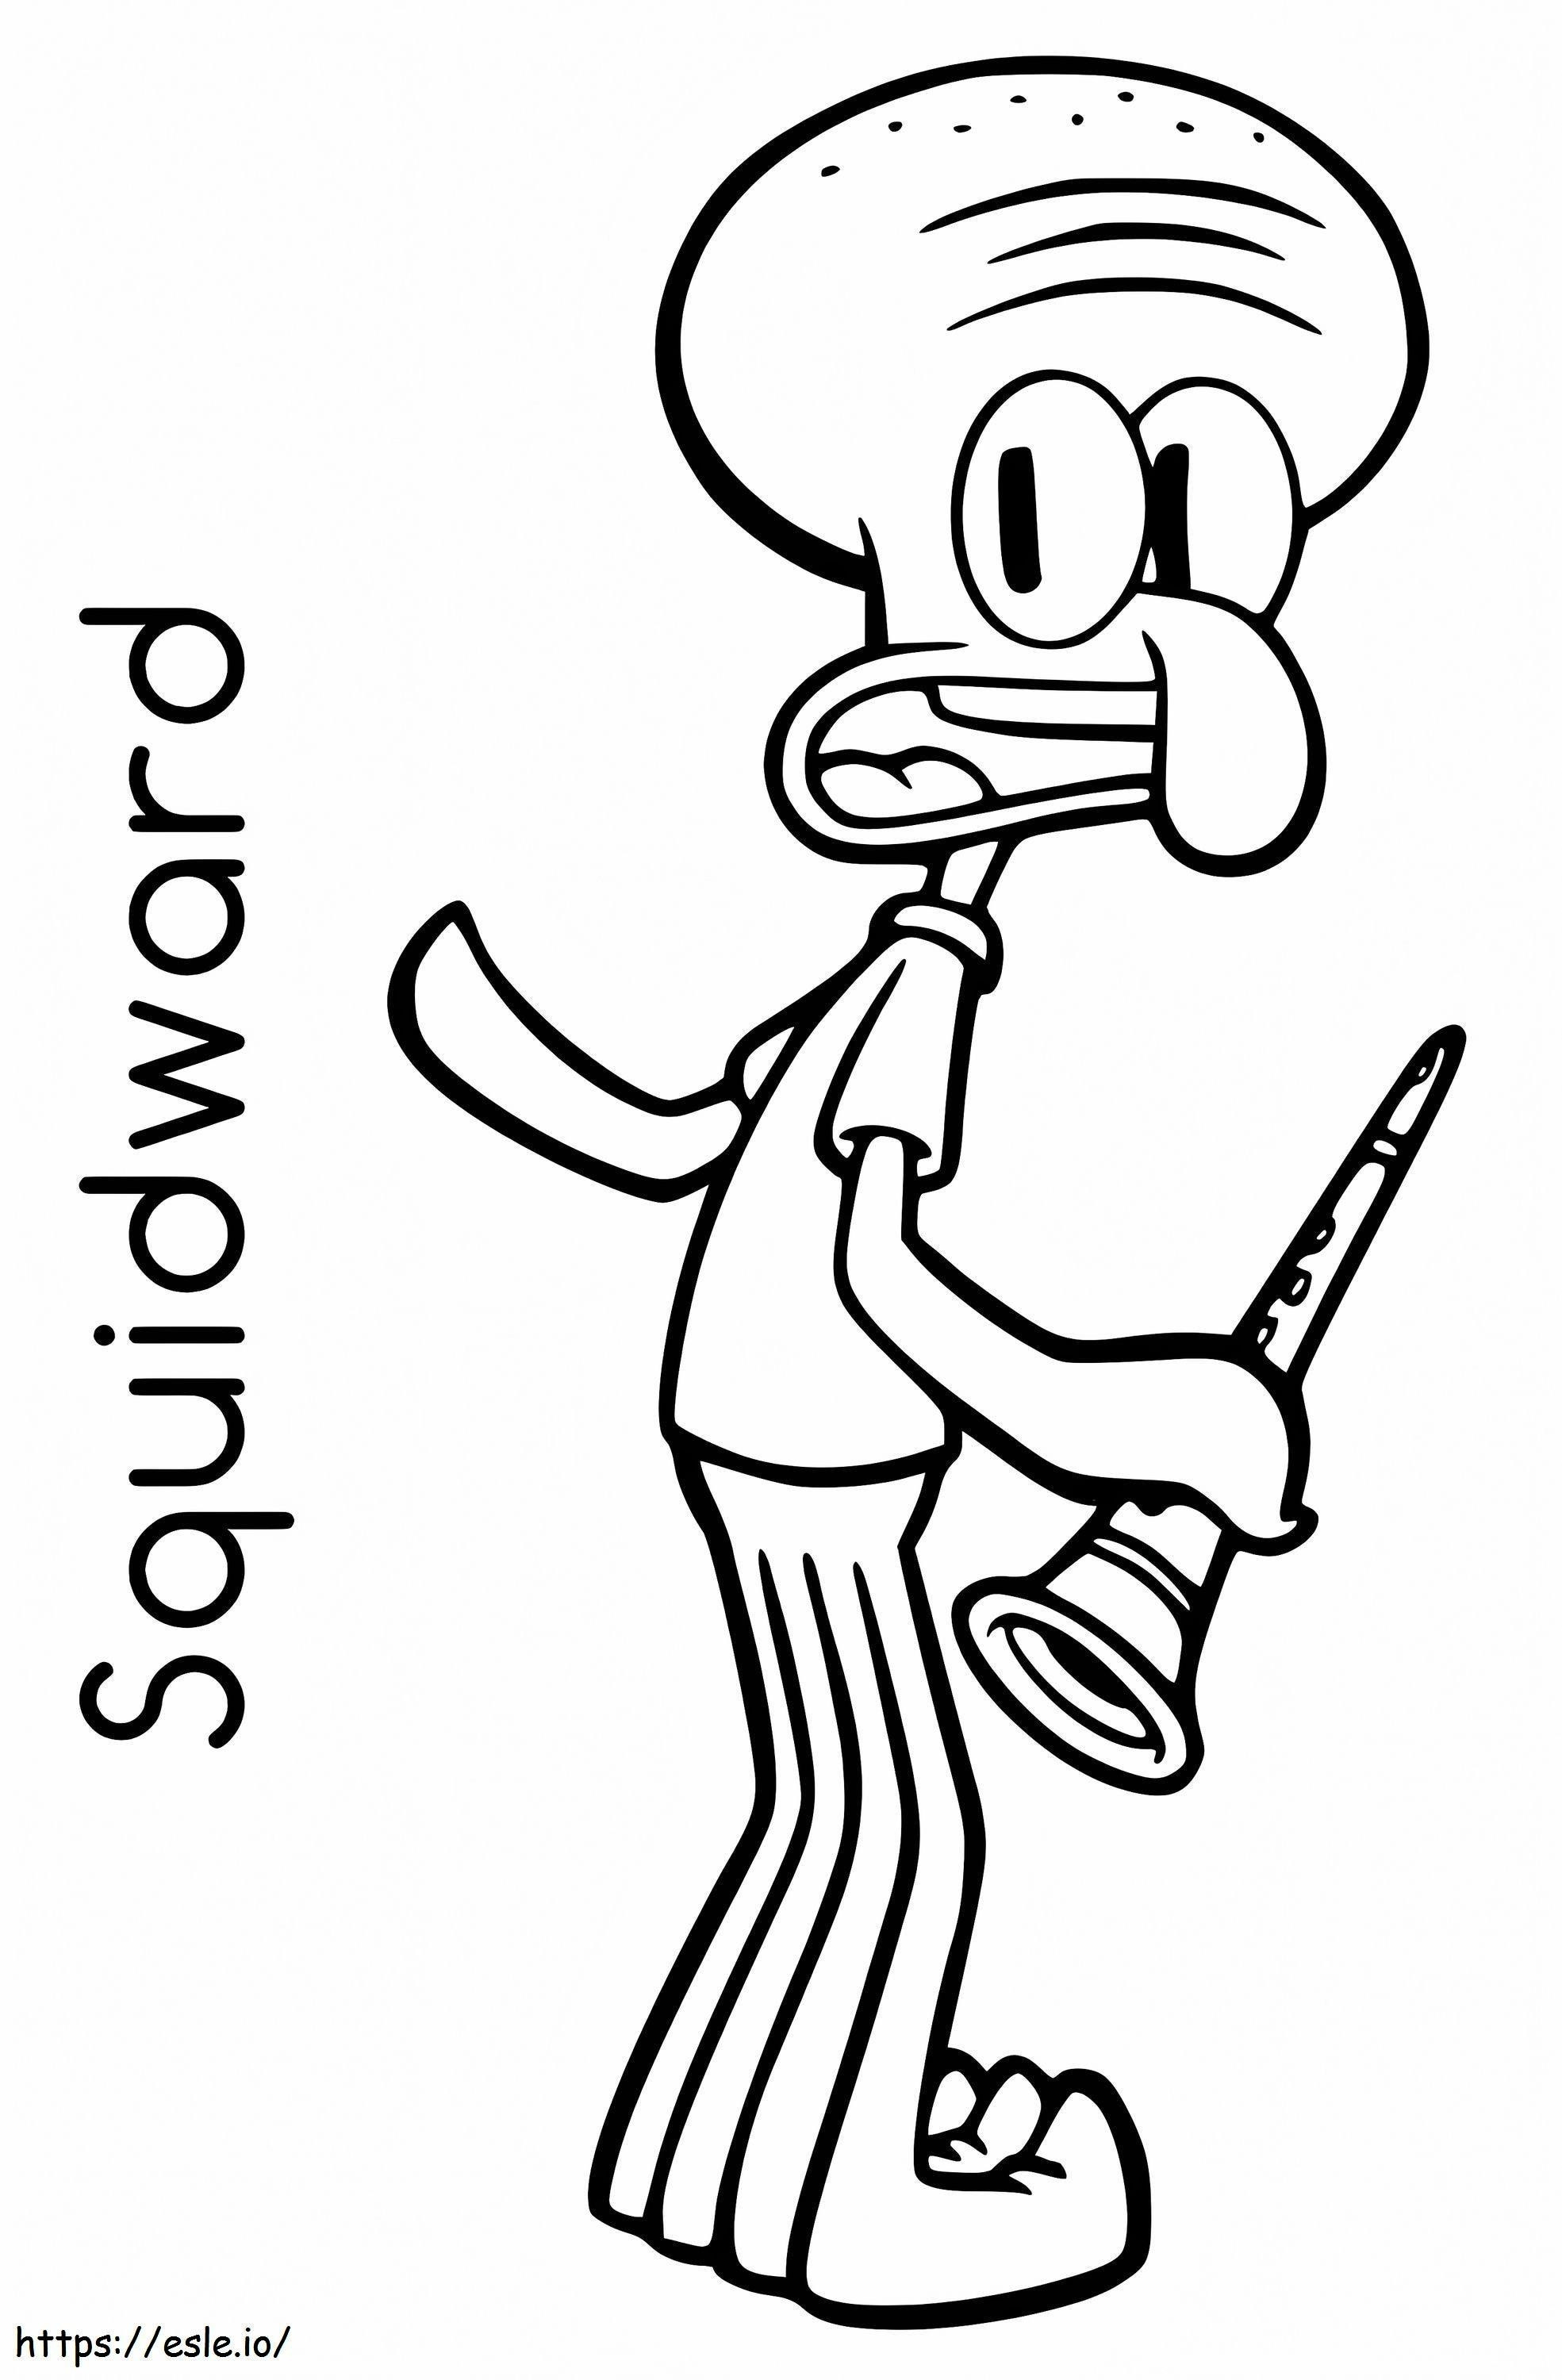 Squidward 3 coloring page